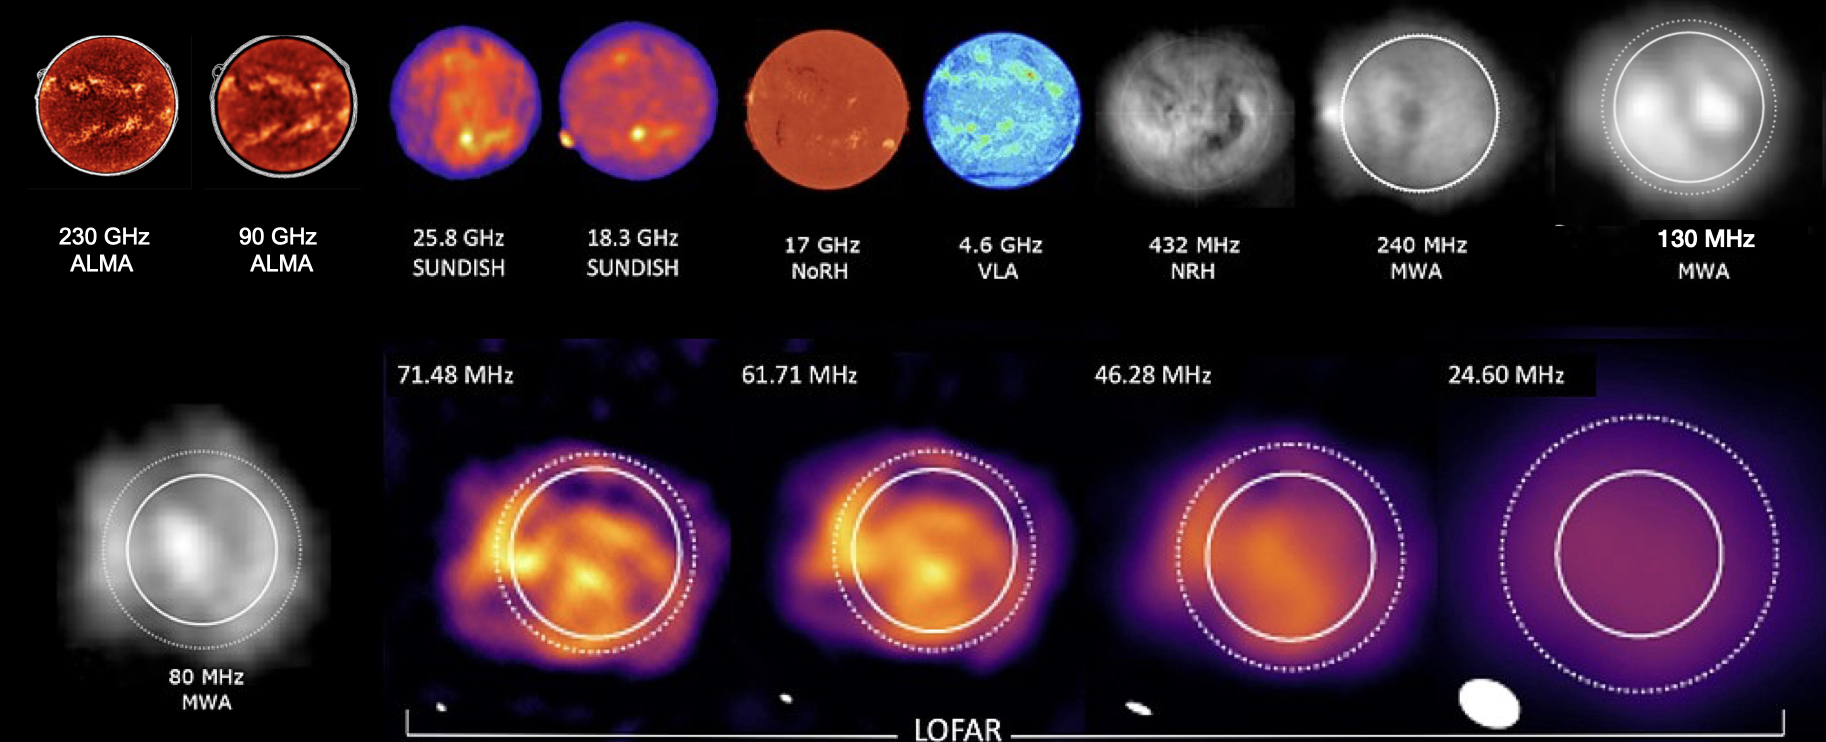 images of the sun at different frequencies in the mm-radio band